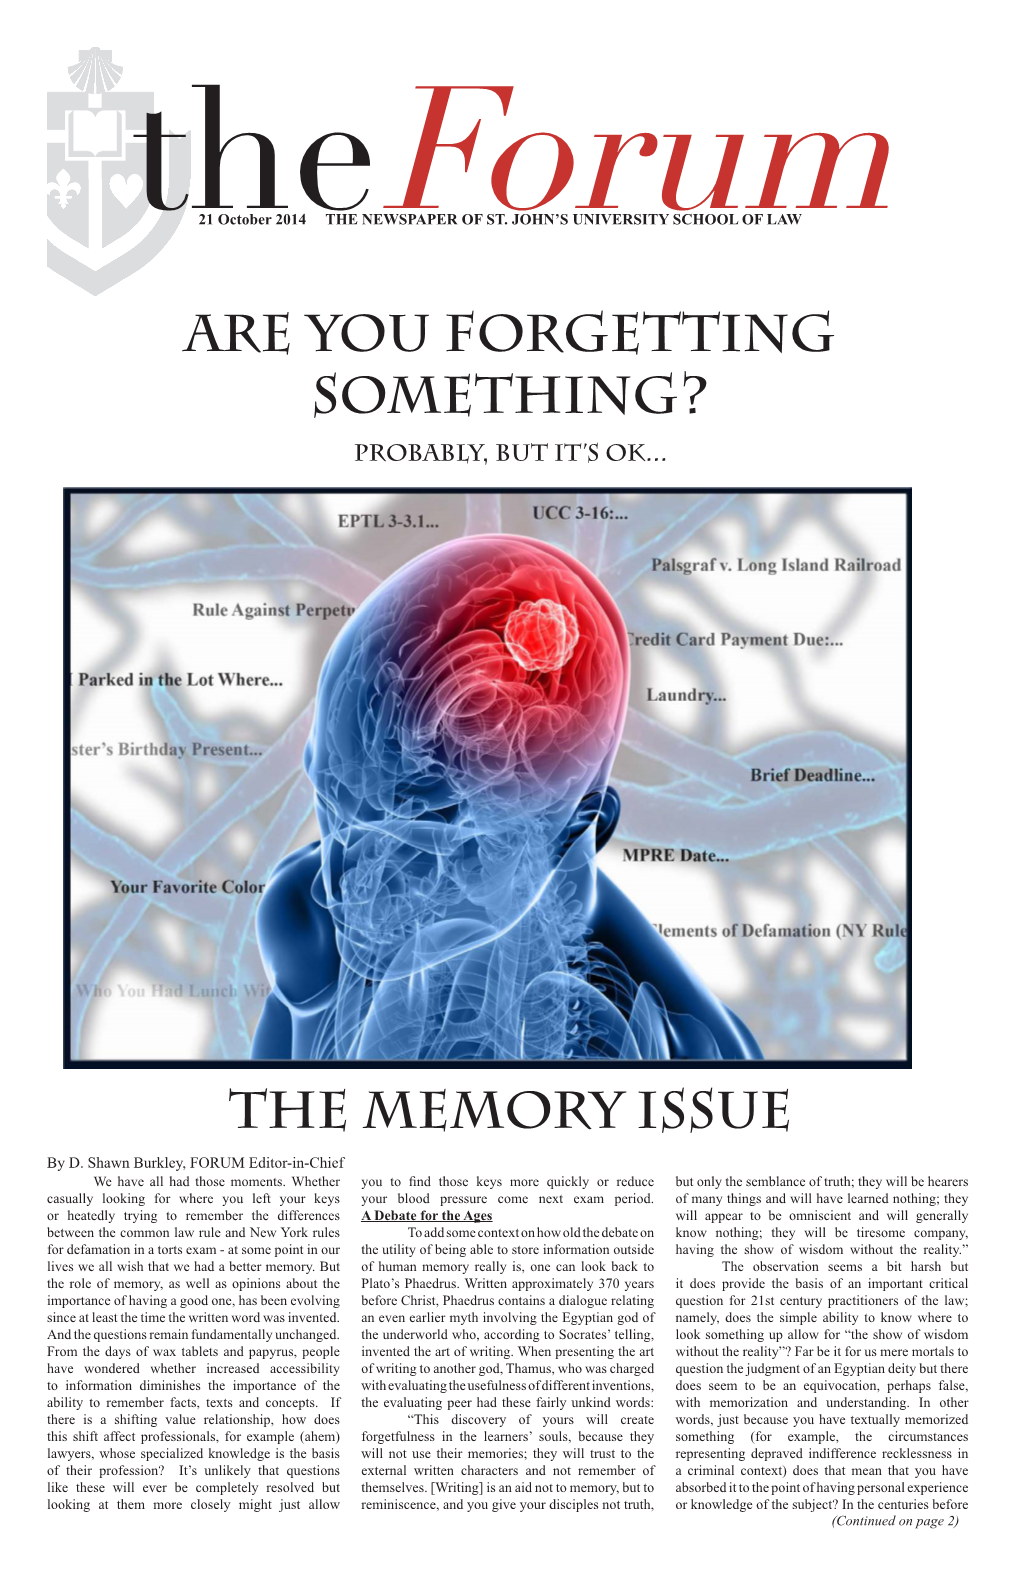 Are You Forgetting Something? the Memory Issue